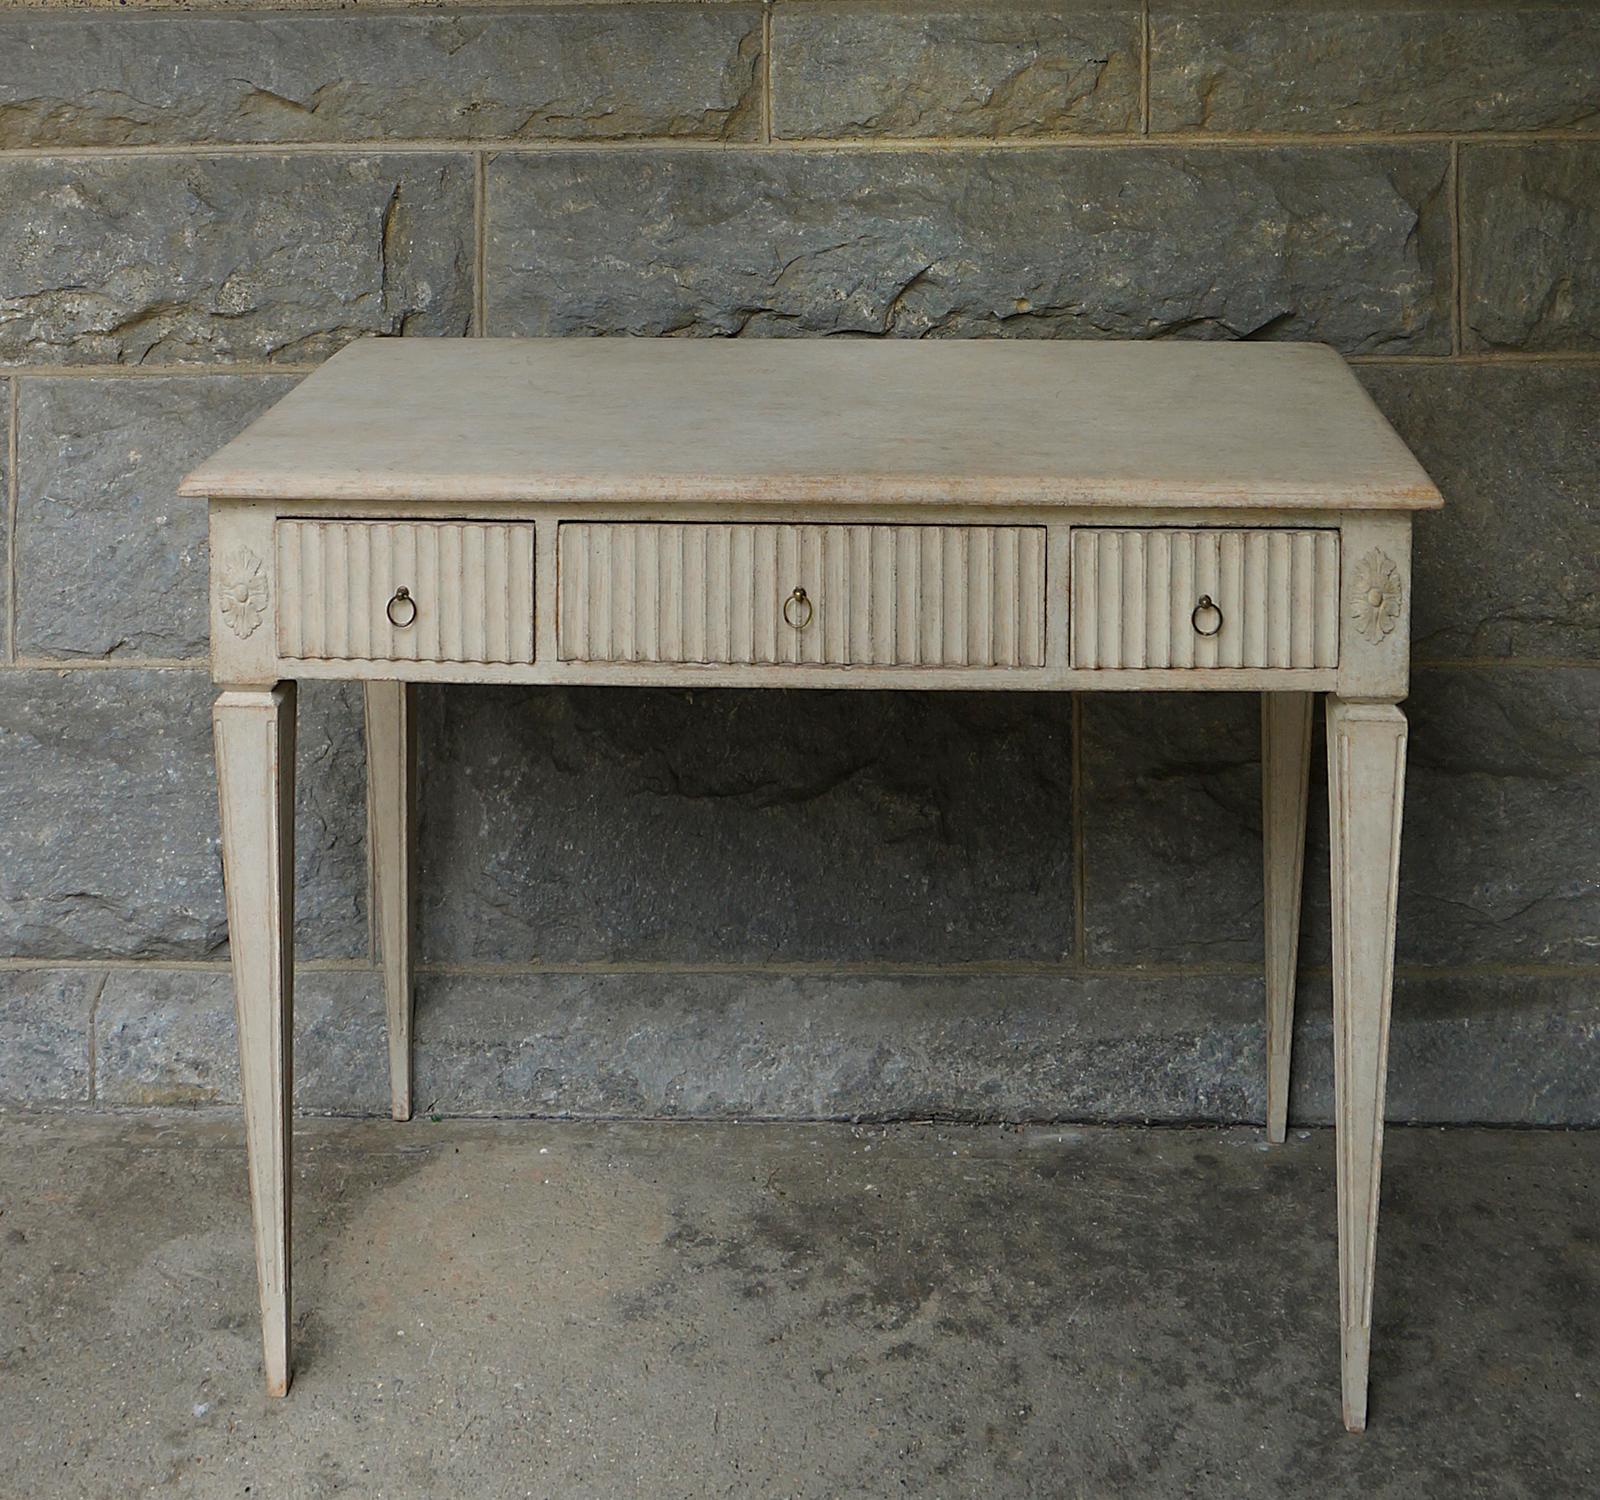 Gustavian style writing desk, Sweden circa 1880, with three apron drawers with vertical reeding and simple brass pulls. Applied rosettes at the corners above tapering square legs with incised detail. Nice roomy top perfect for a laptop computer or